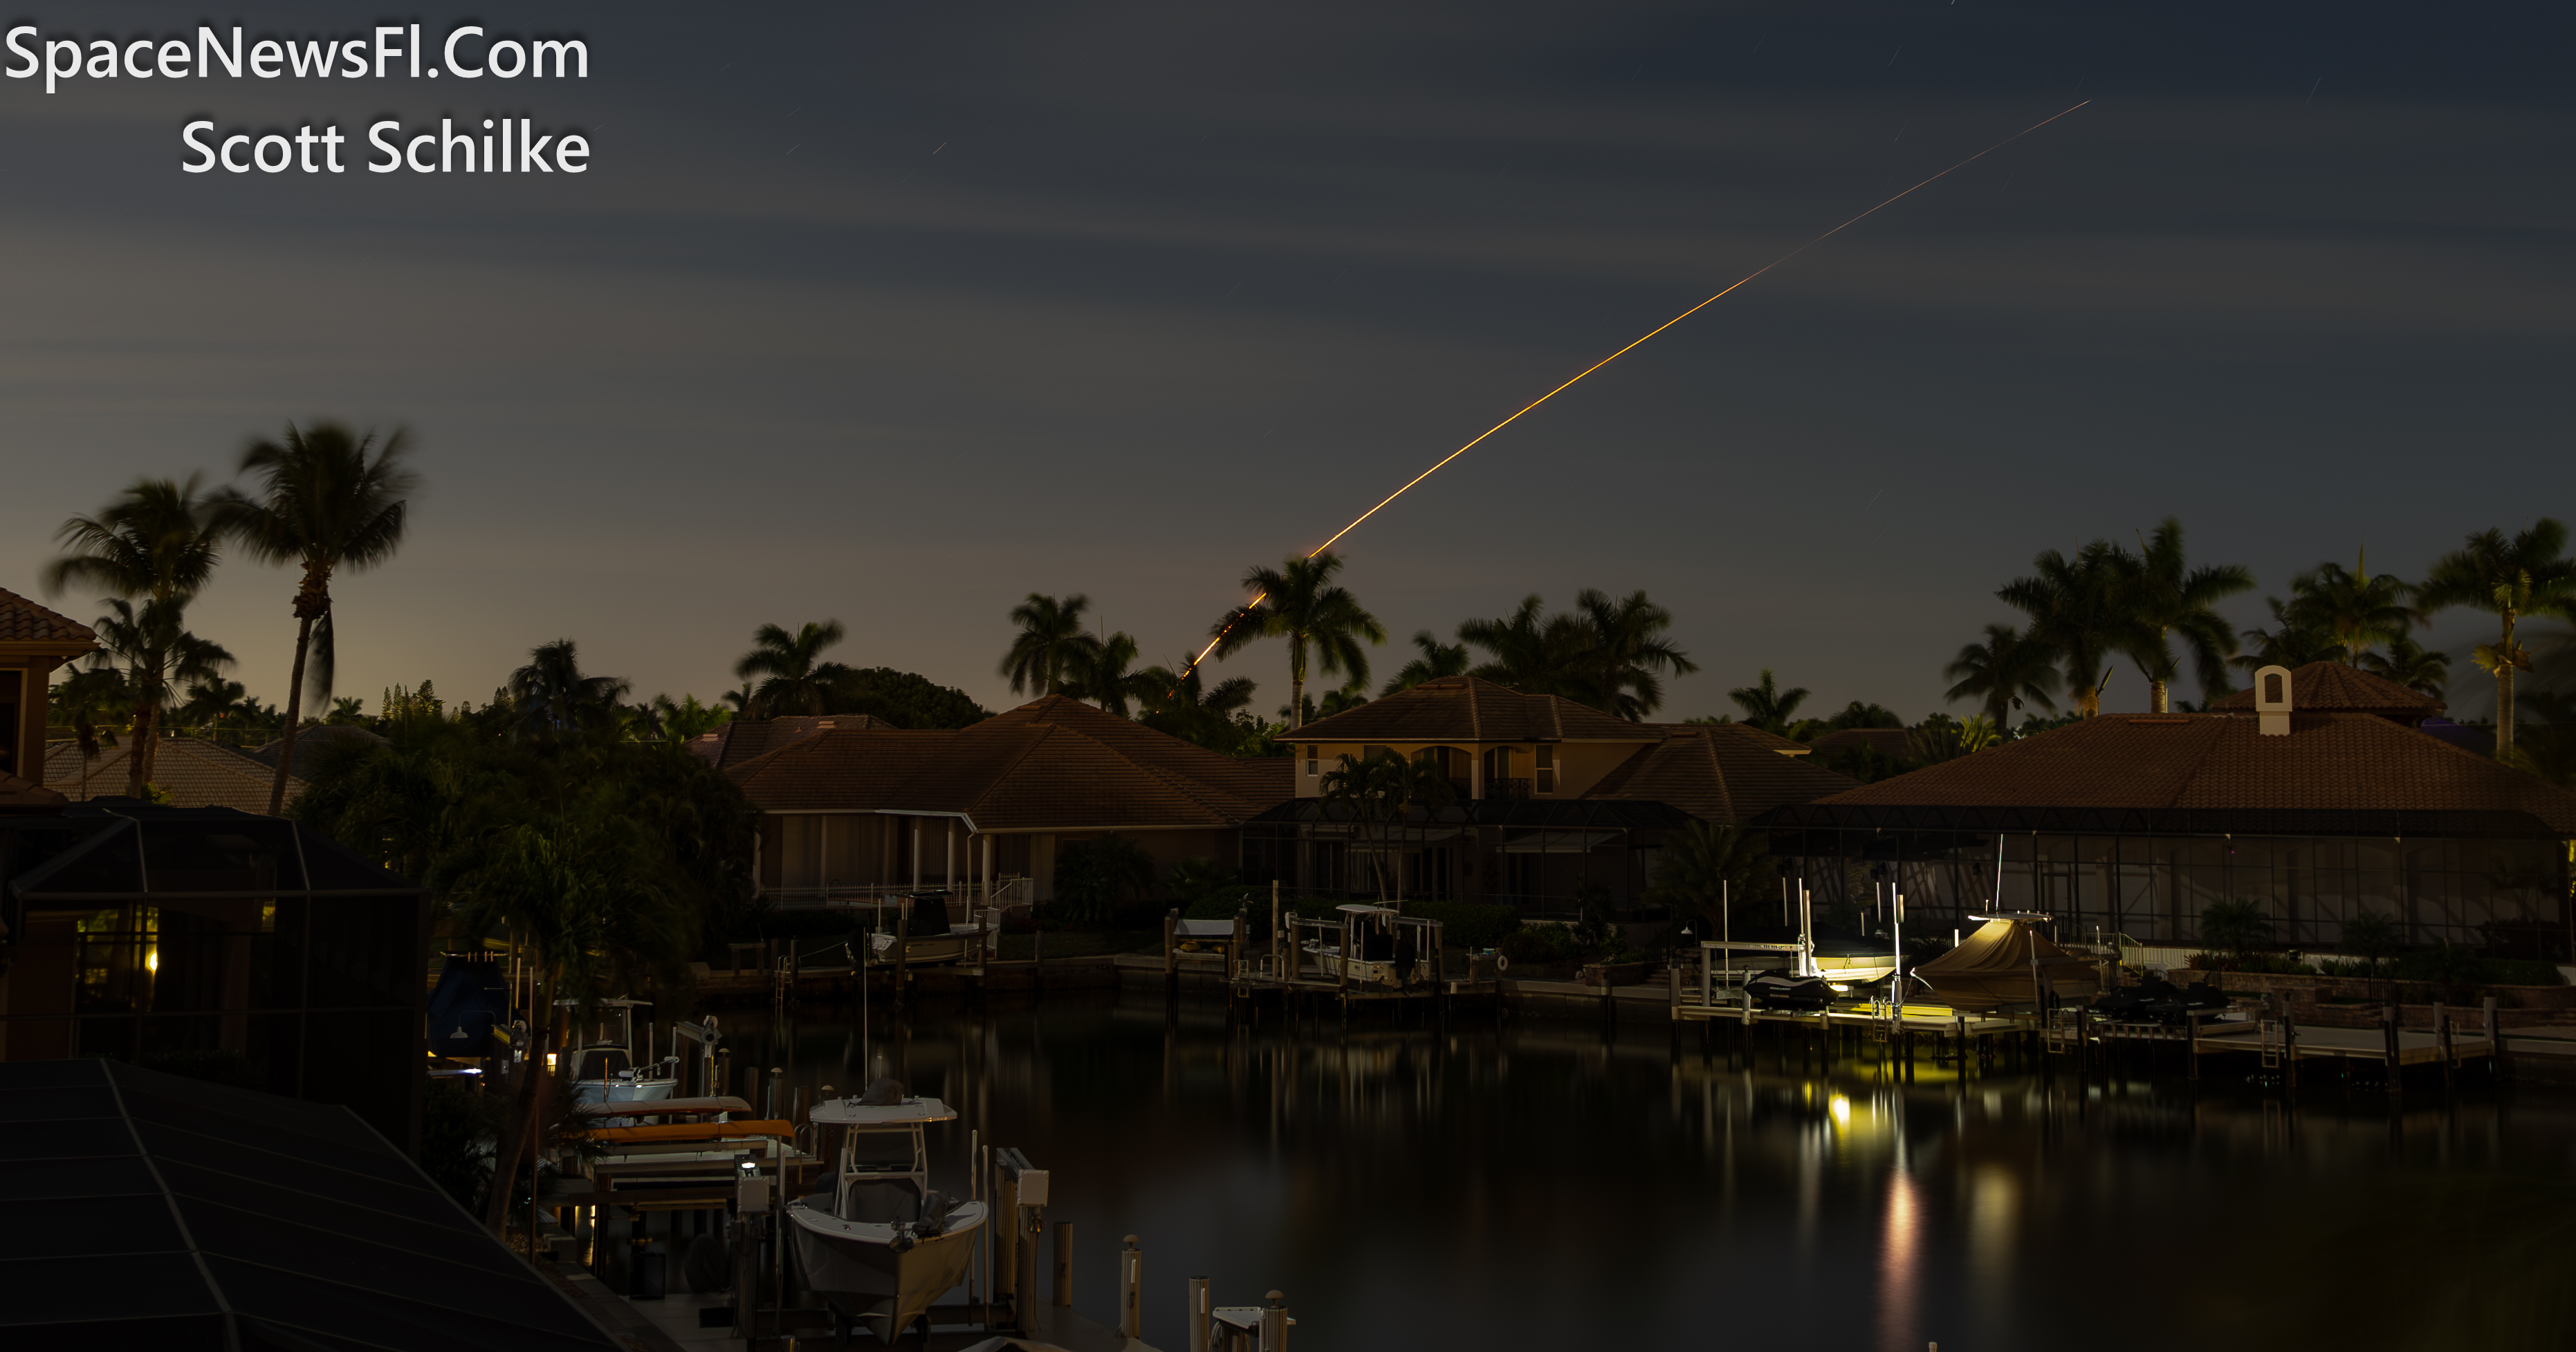 Historic First 19th Booster Flight As Seen From Marco Island Starlink 6-32 